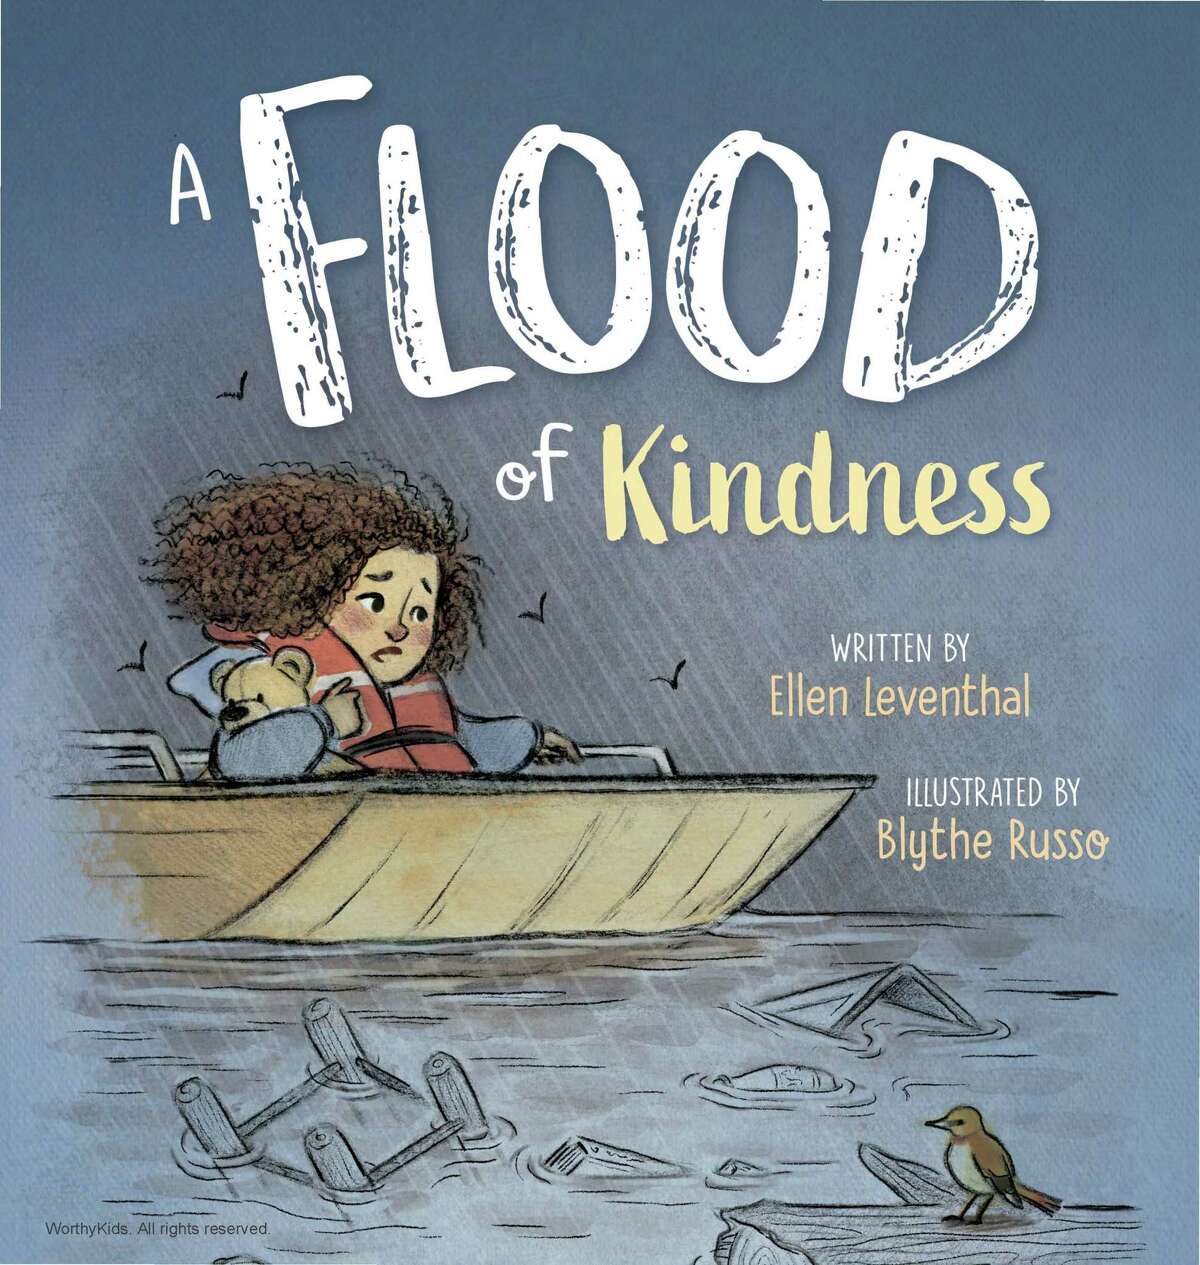 Author and educator Ellen Leventhal's latest book A Flood of Kindness will be released on April 13. Leventhal is planning a virtual book launch event with Brazos Bookstore on April 24.